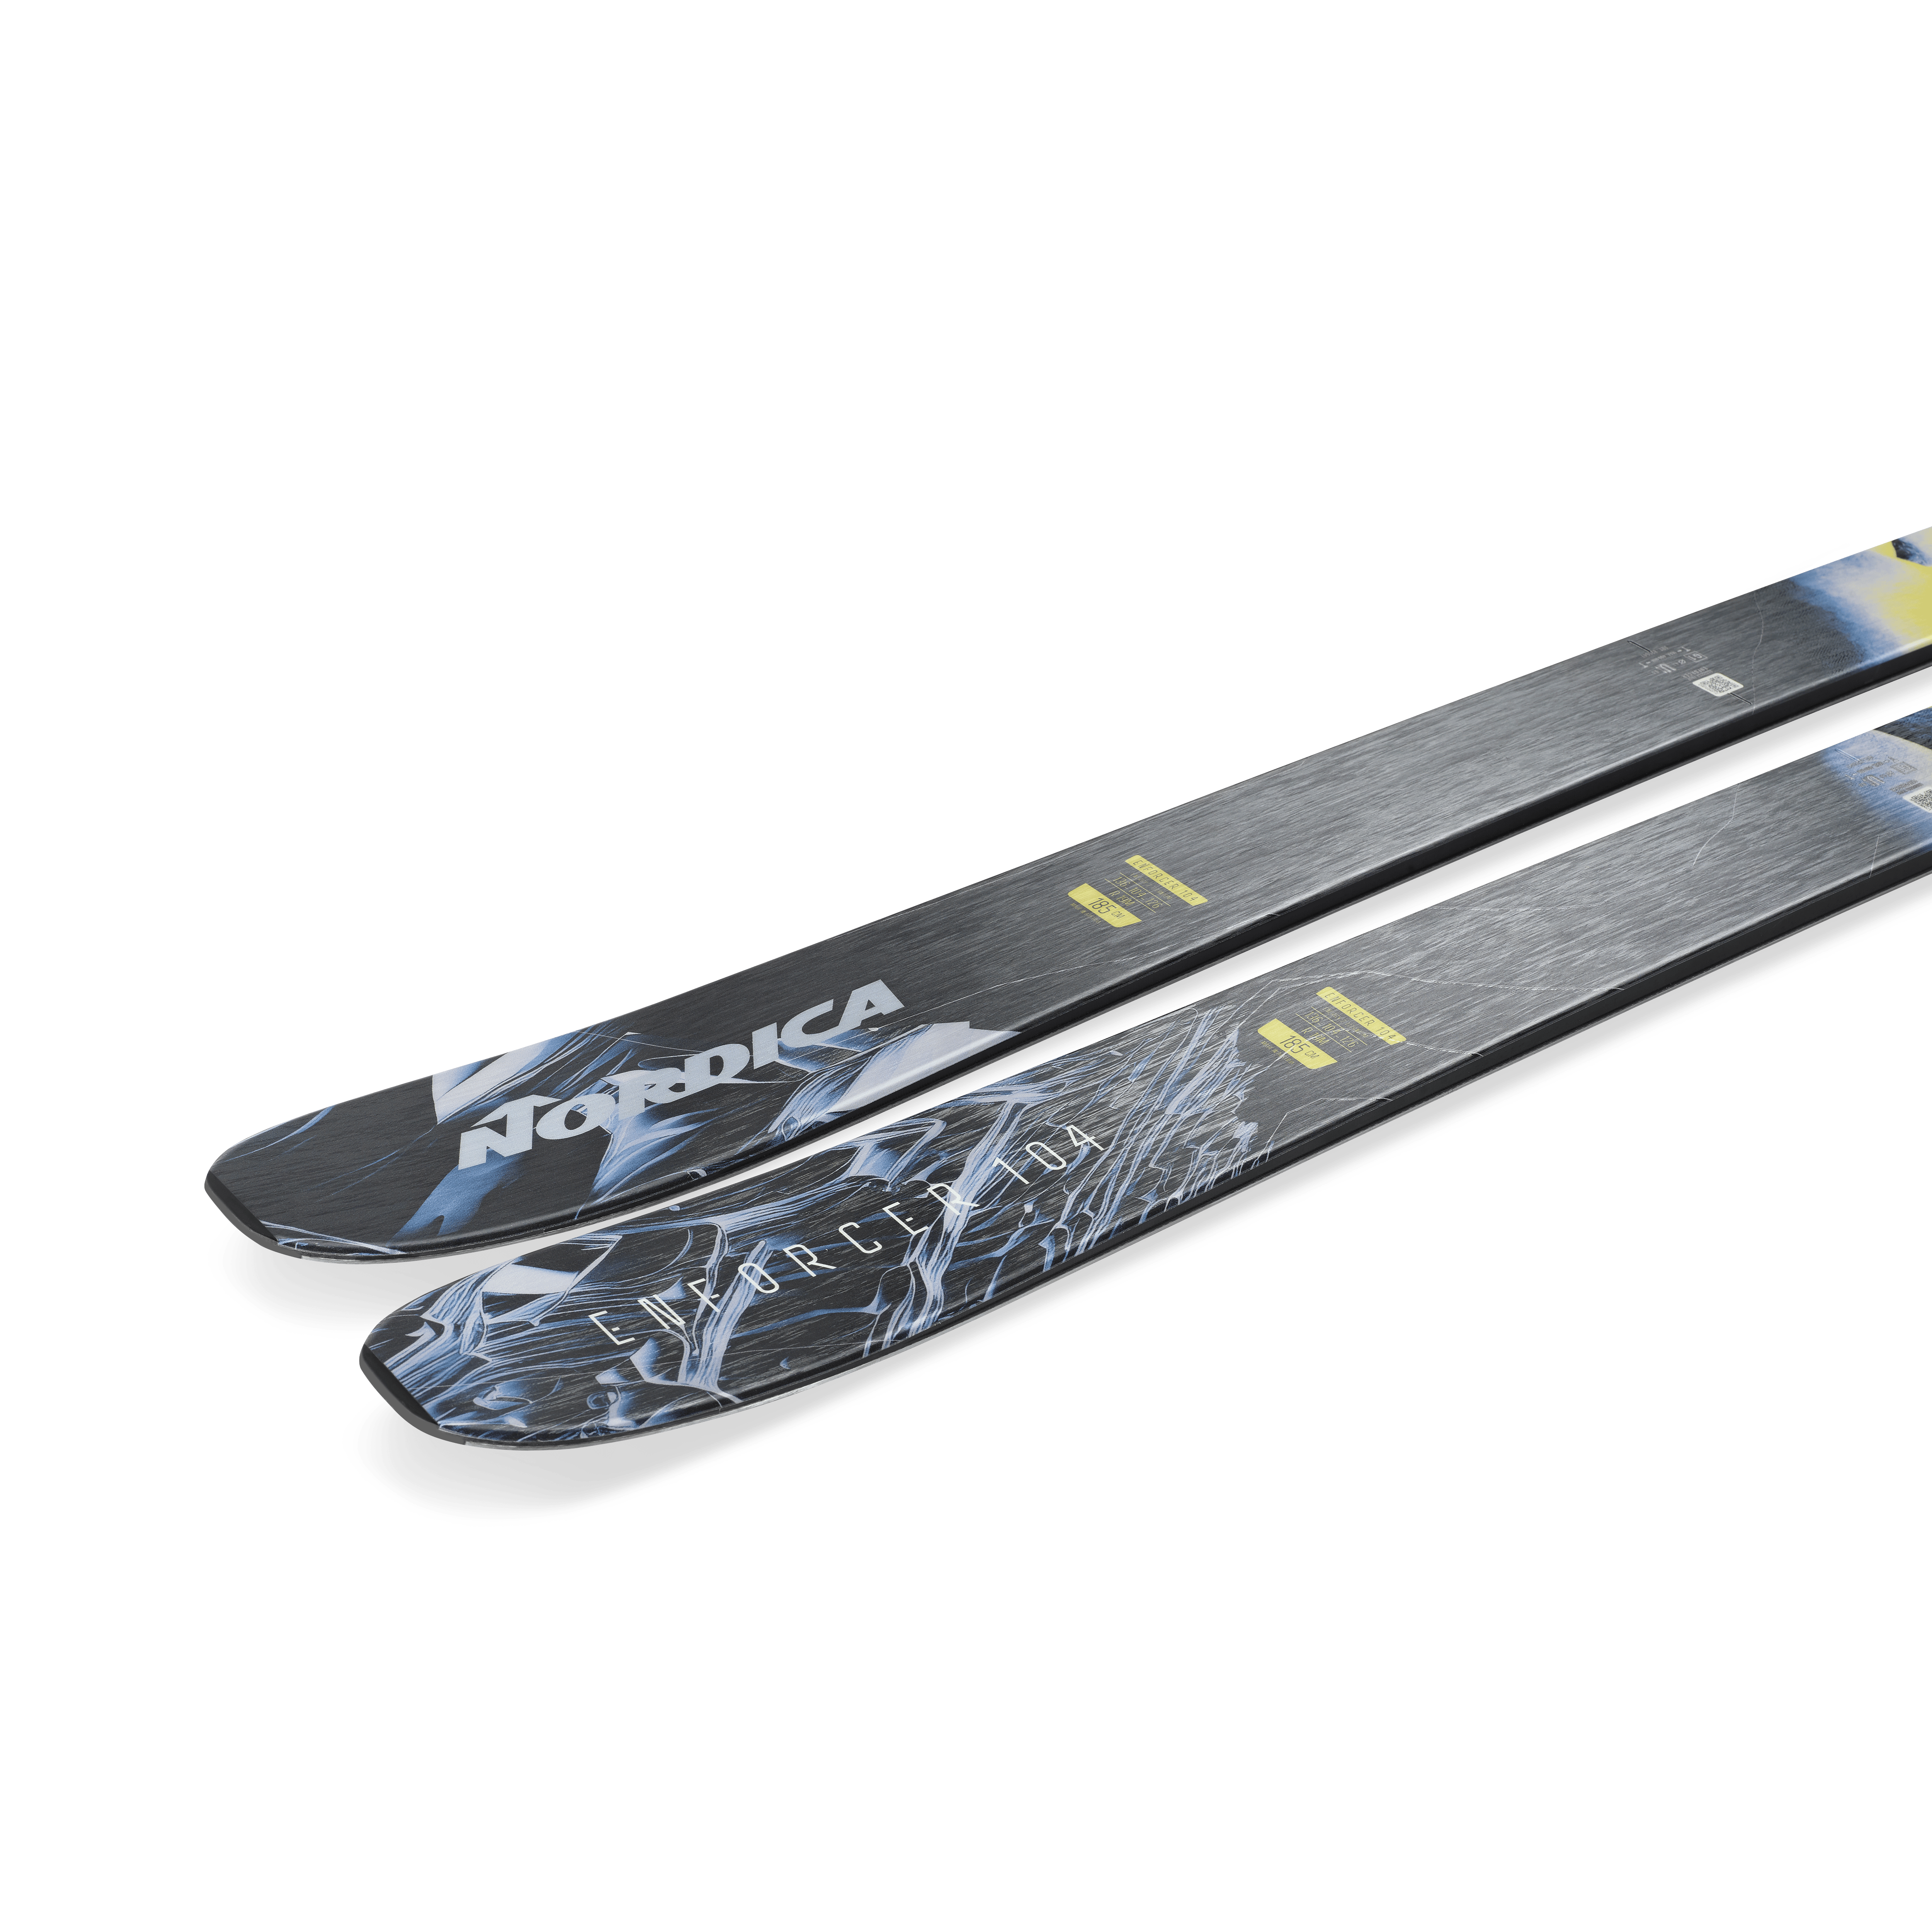 Picture of the Nordica Enforcer 104 skis.